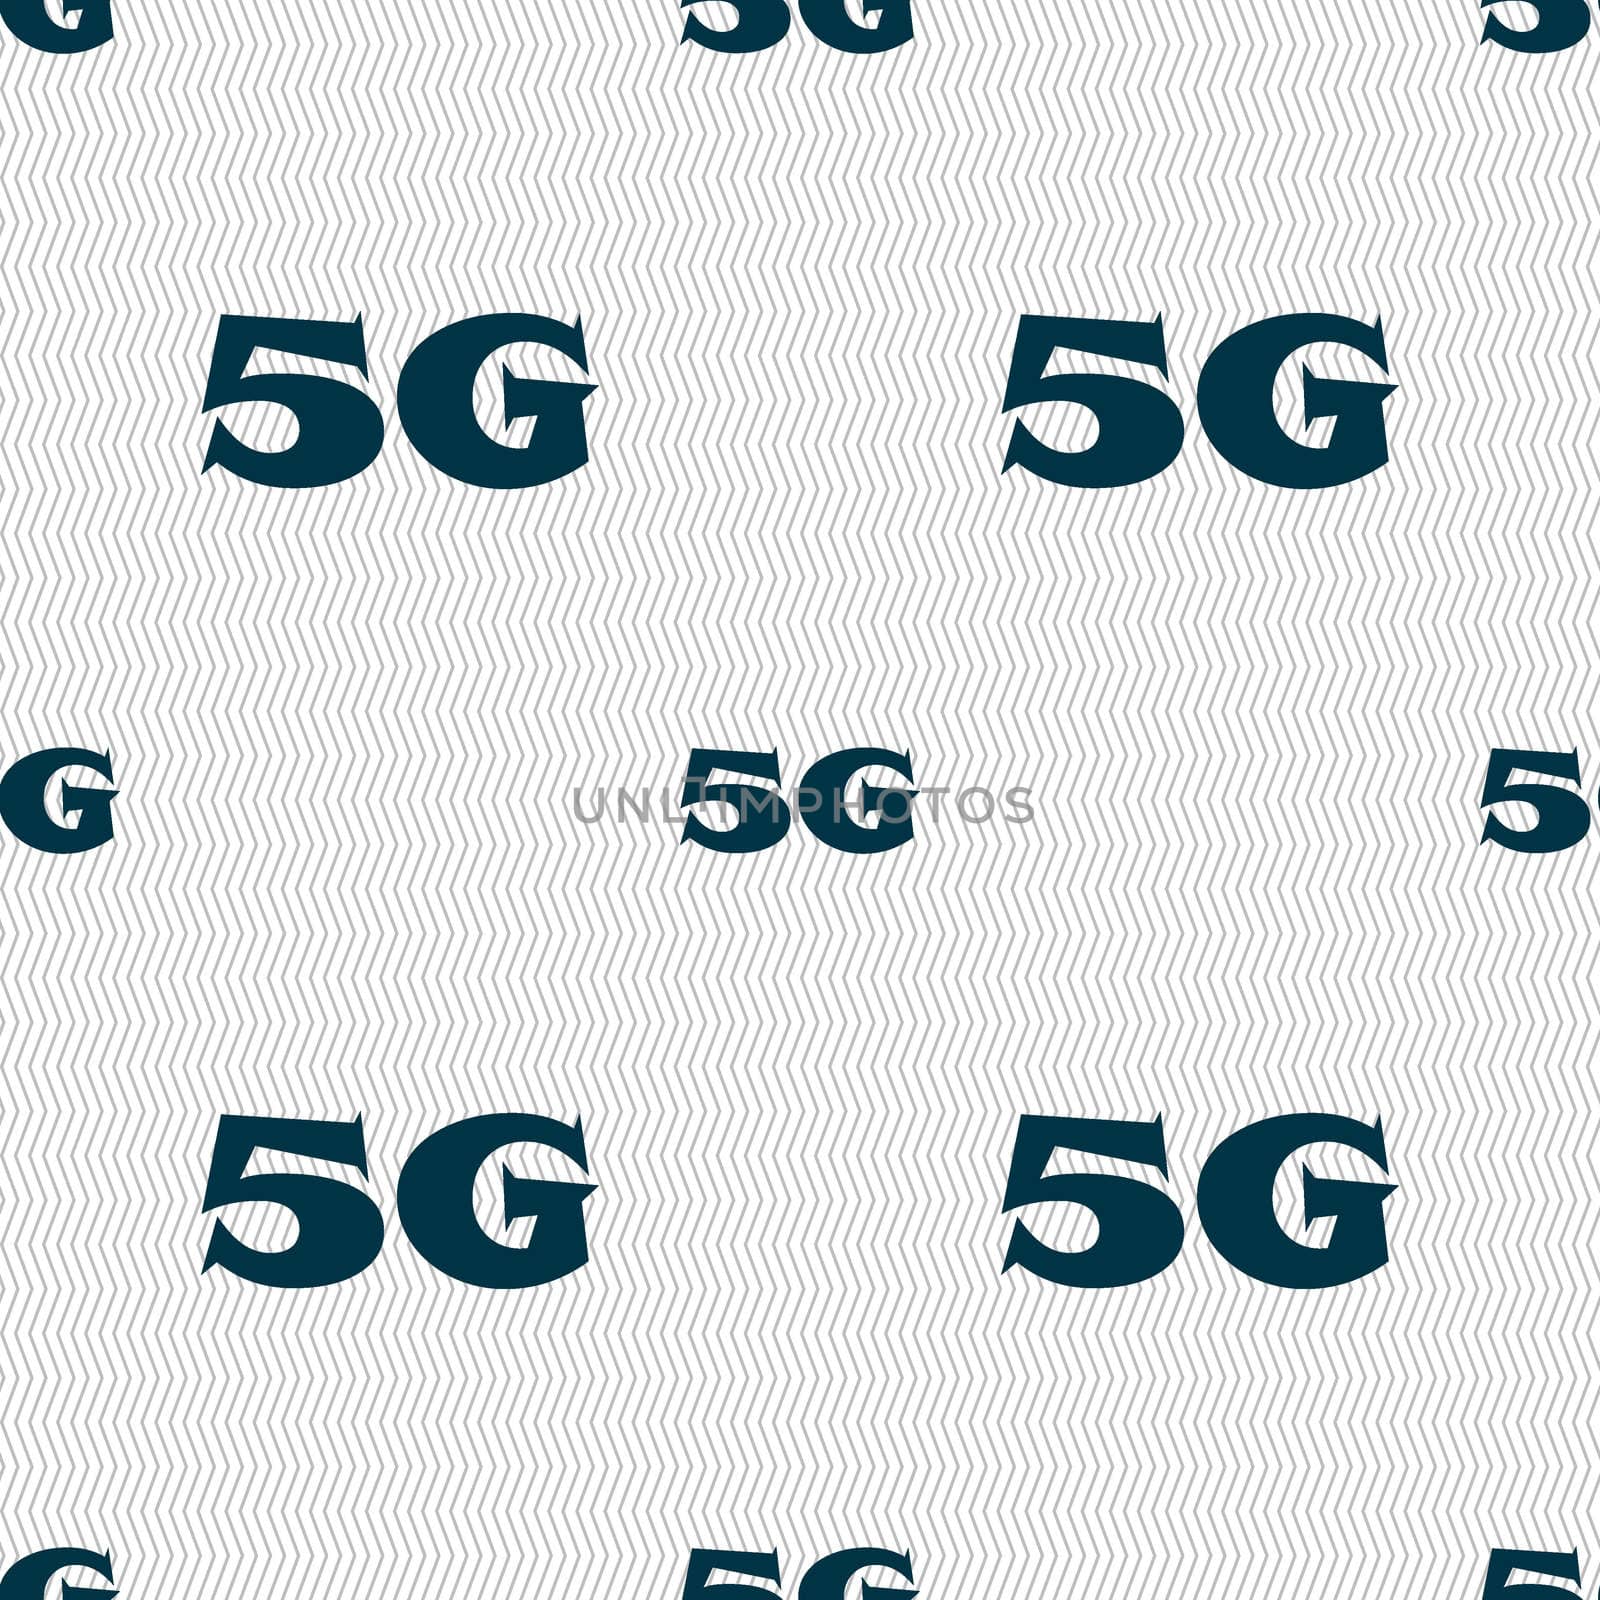 5G sign icon. Mobile telecommunications technology symbol. Seamless abstract background with geometric shapes. illustration